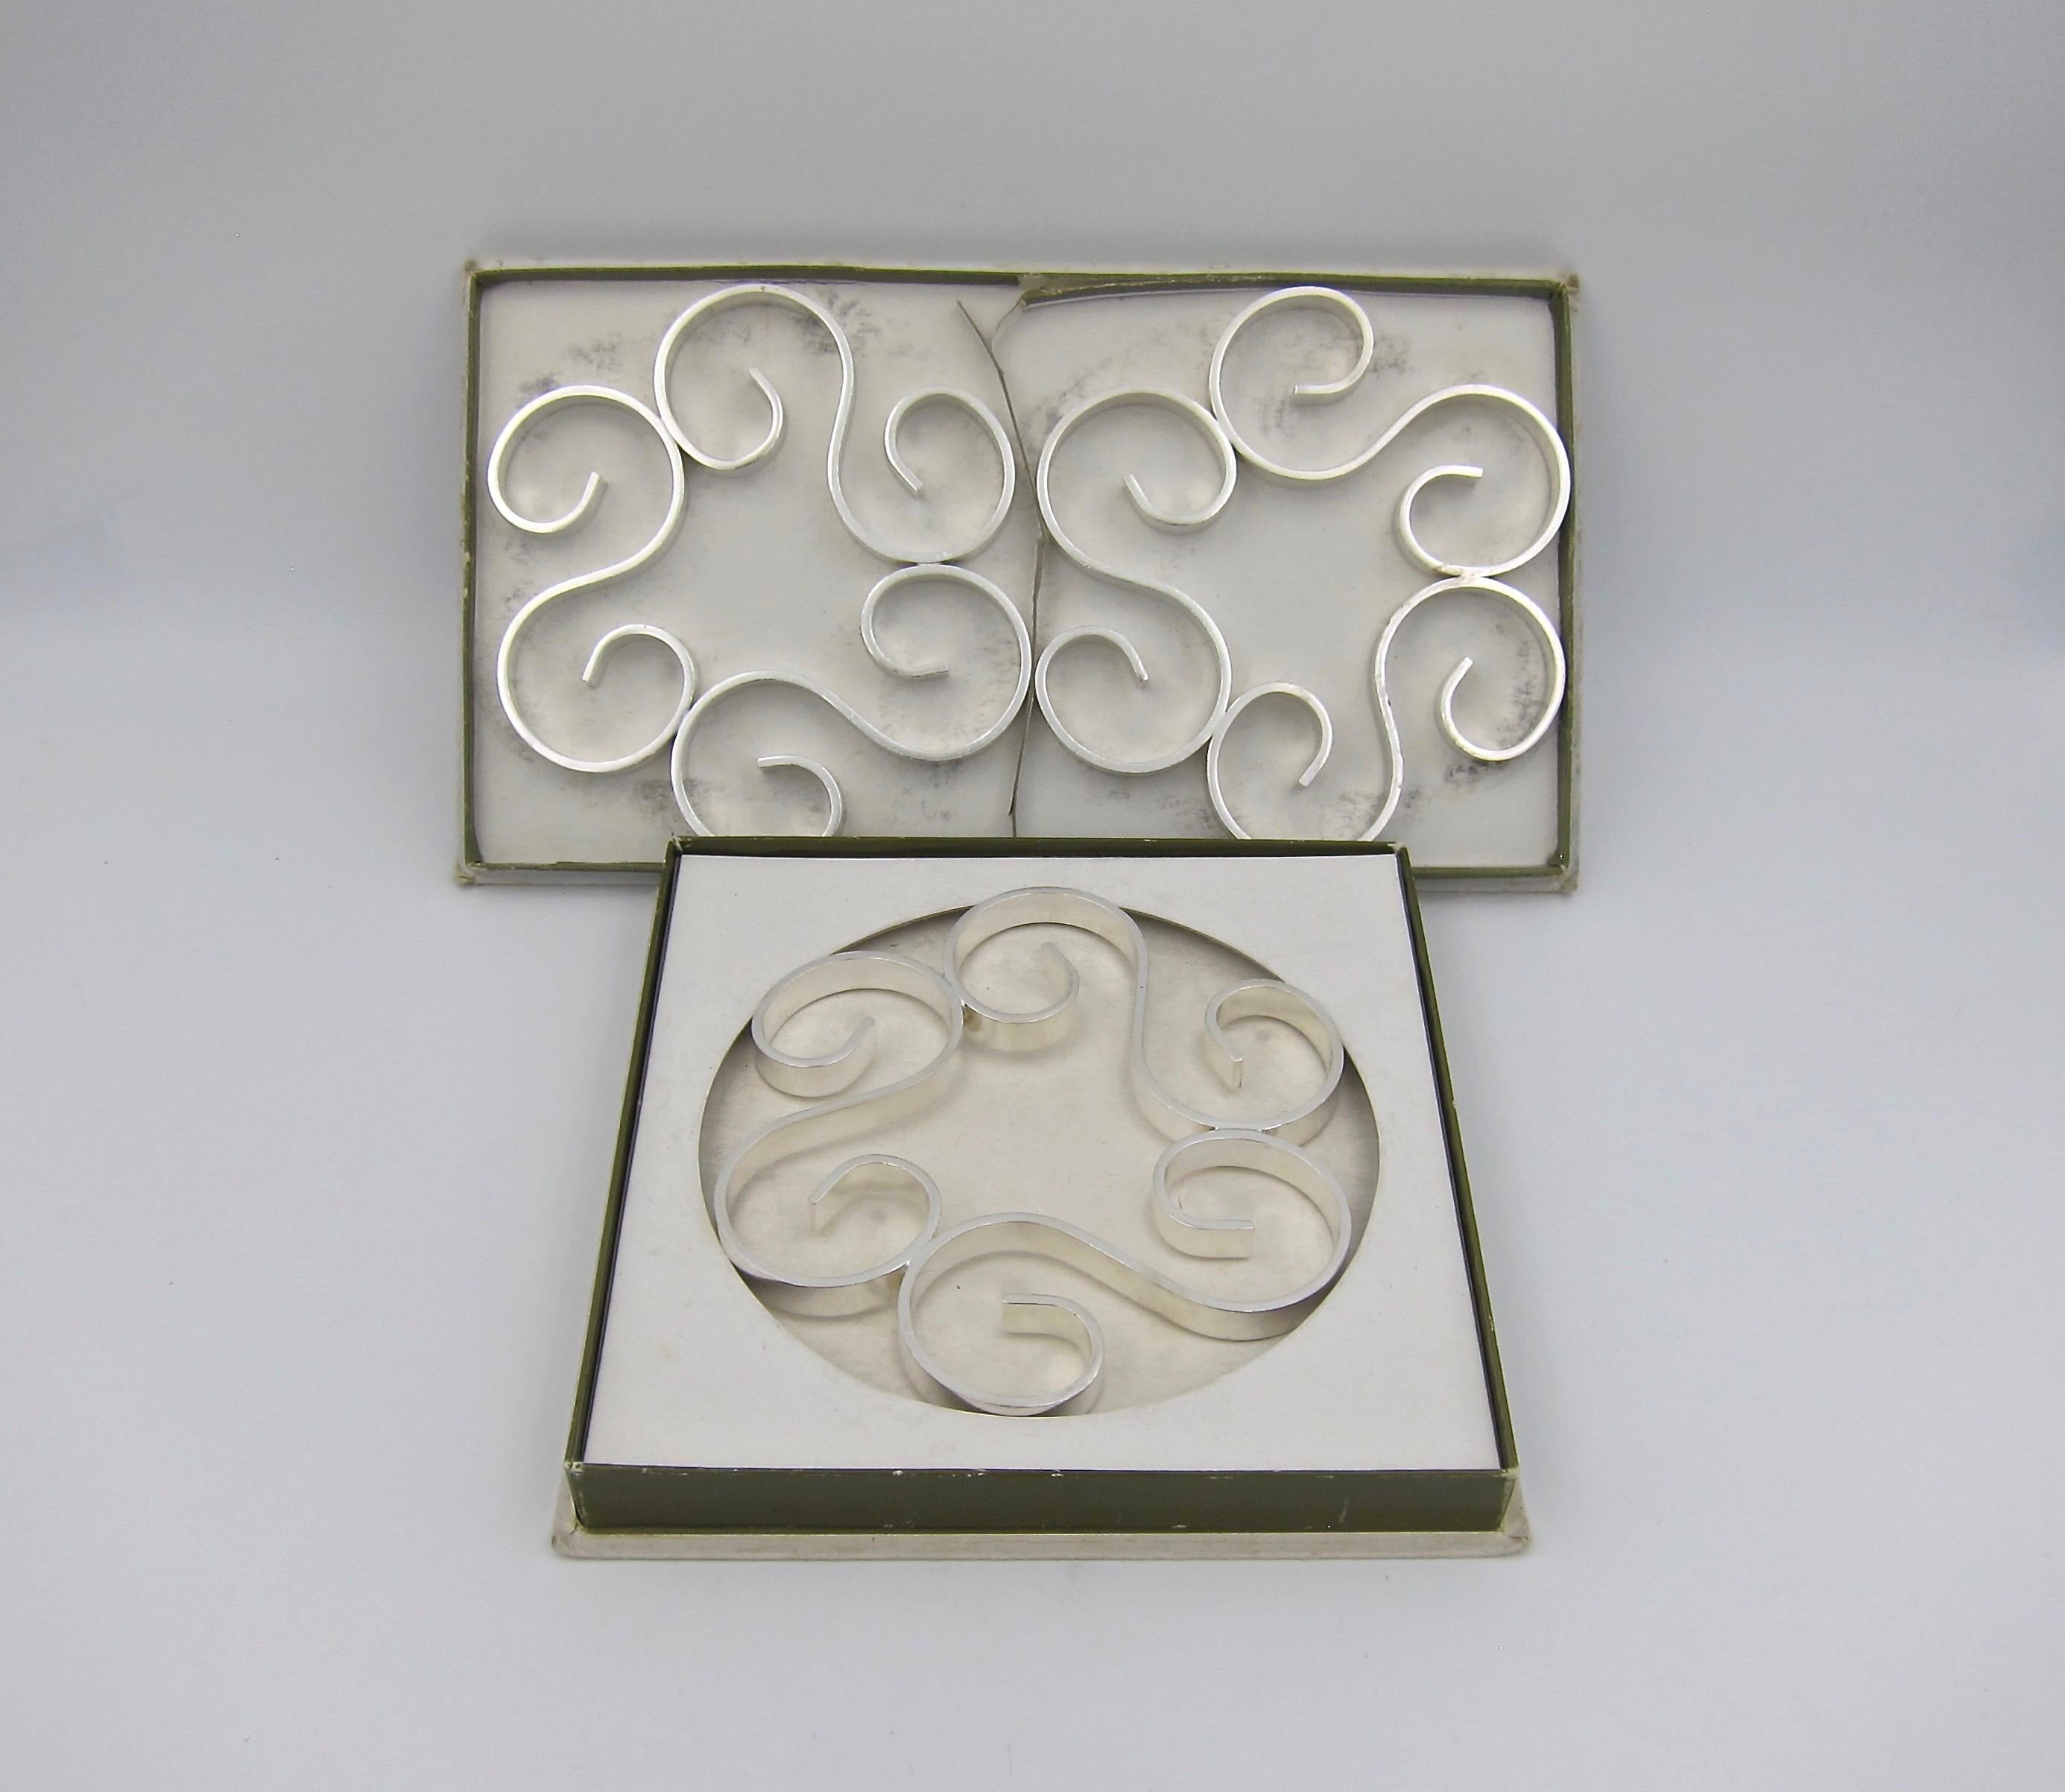 A vintage set of three Christofle Gallia trivets from the company's line of silvered Gallia metal luxury goods designed in France during the Art Deco period. Each 